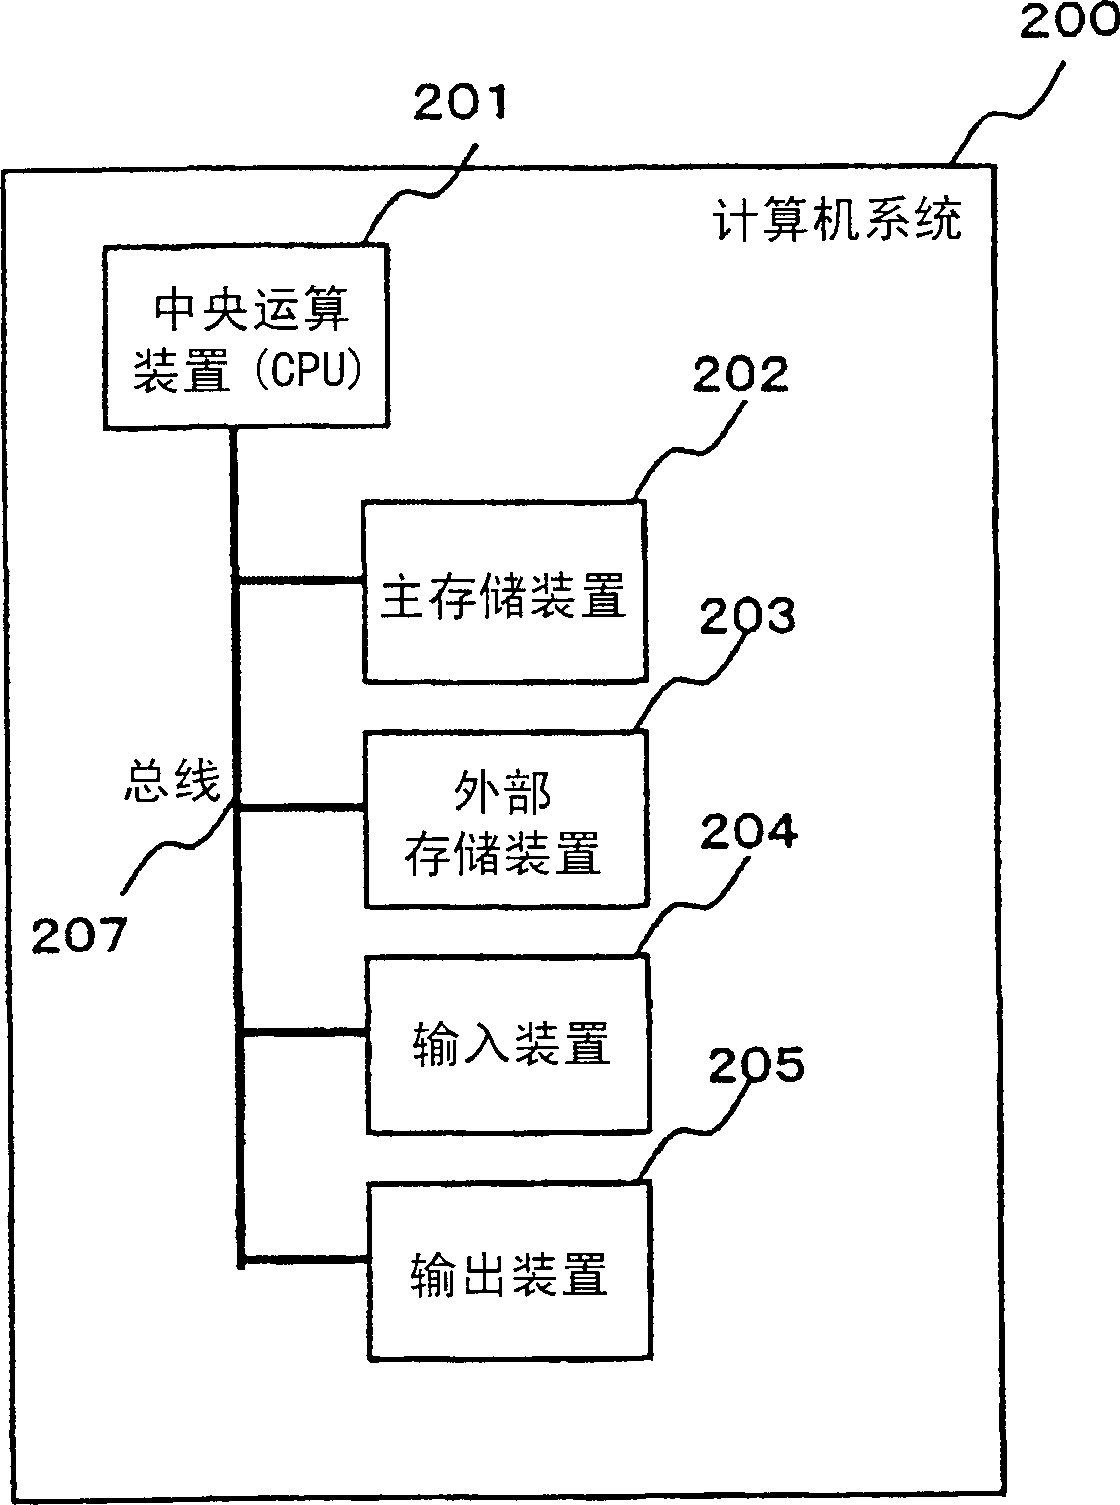 Service level contract support device